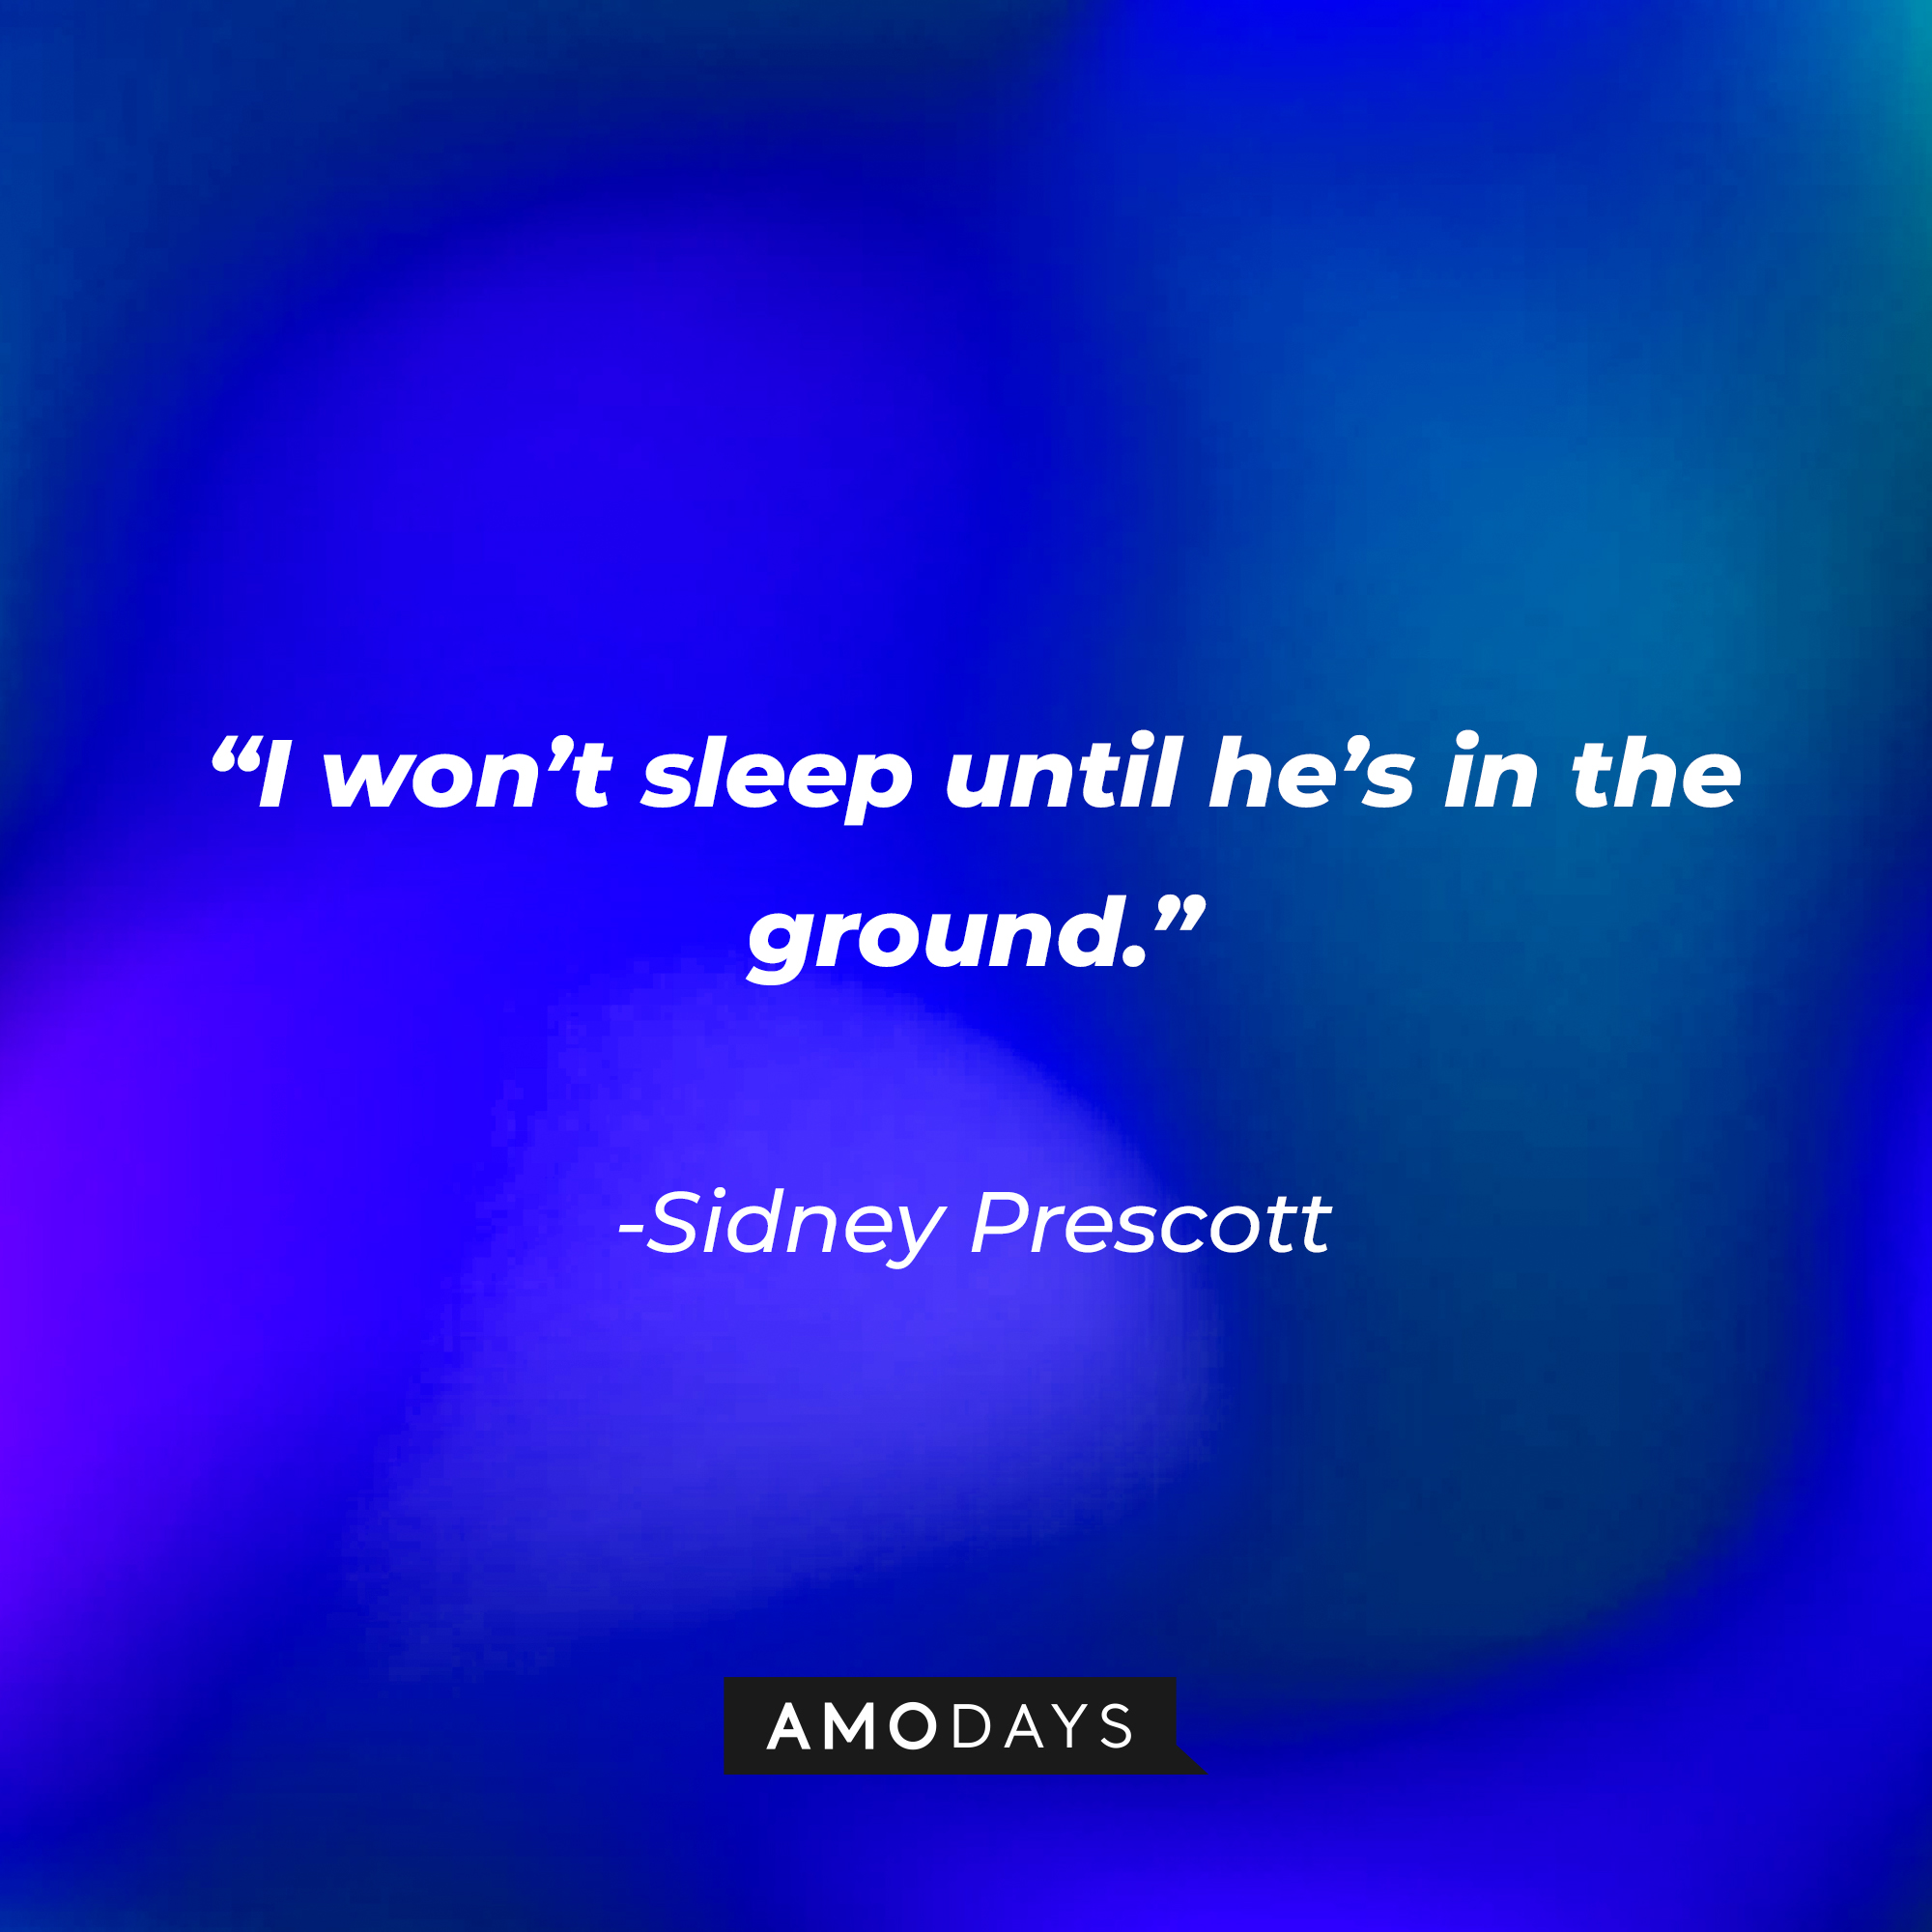 Sidney Prescott’s quote from “Scream '(2020)'": "I won’t sleep until he’s in the ground." | Source: AmoDays